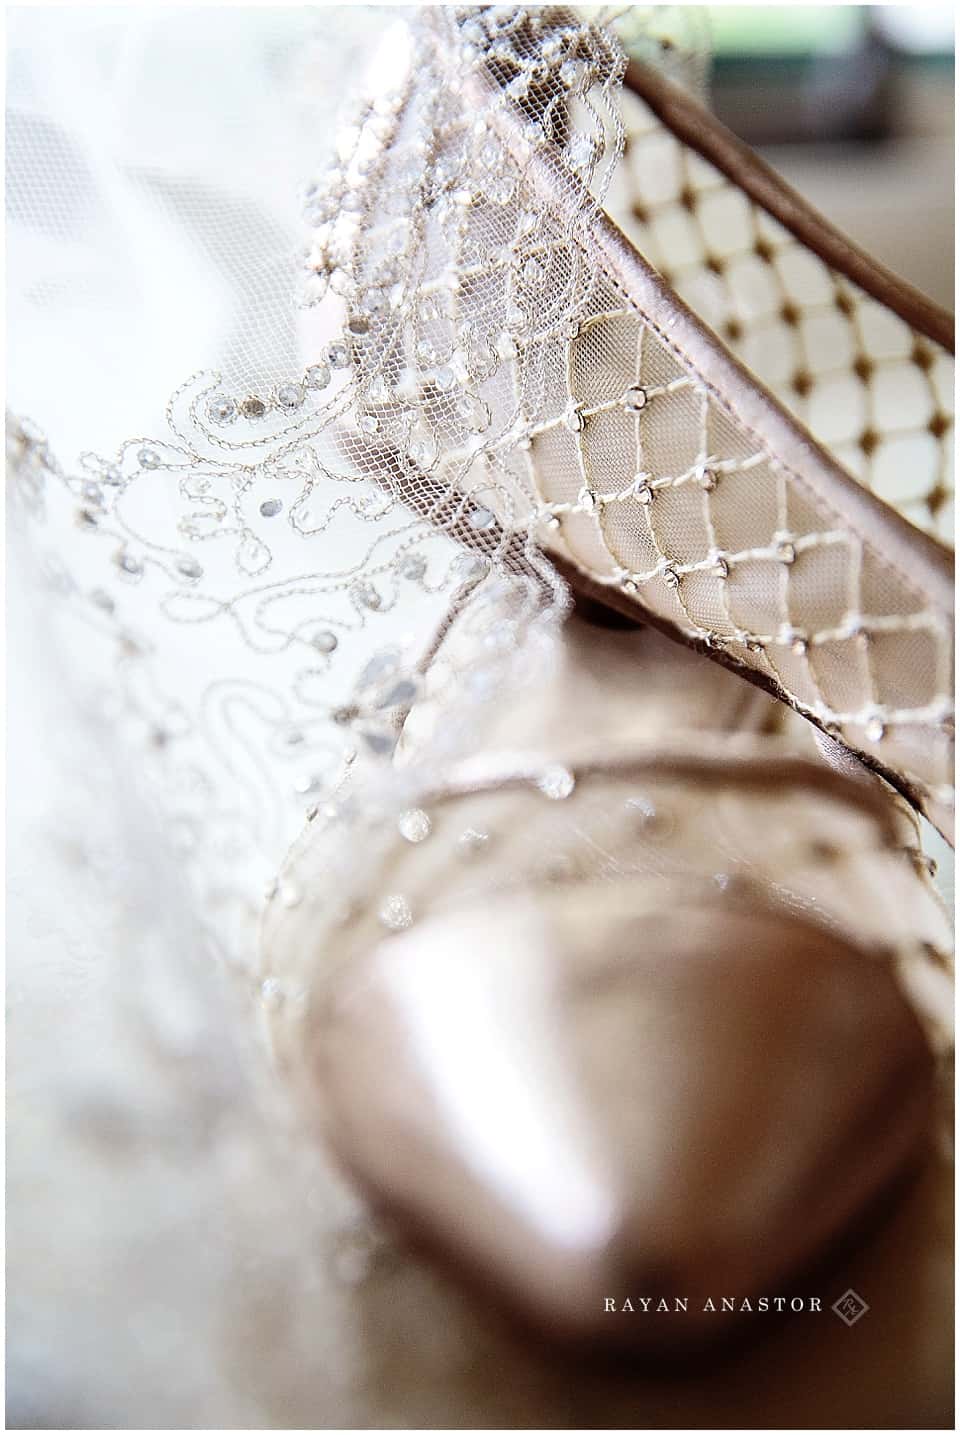 Veil lace and wedding shoes